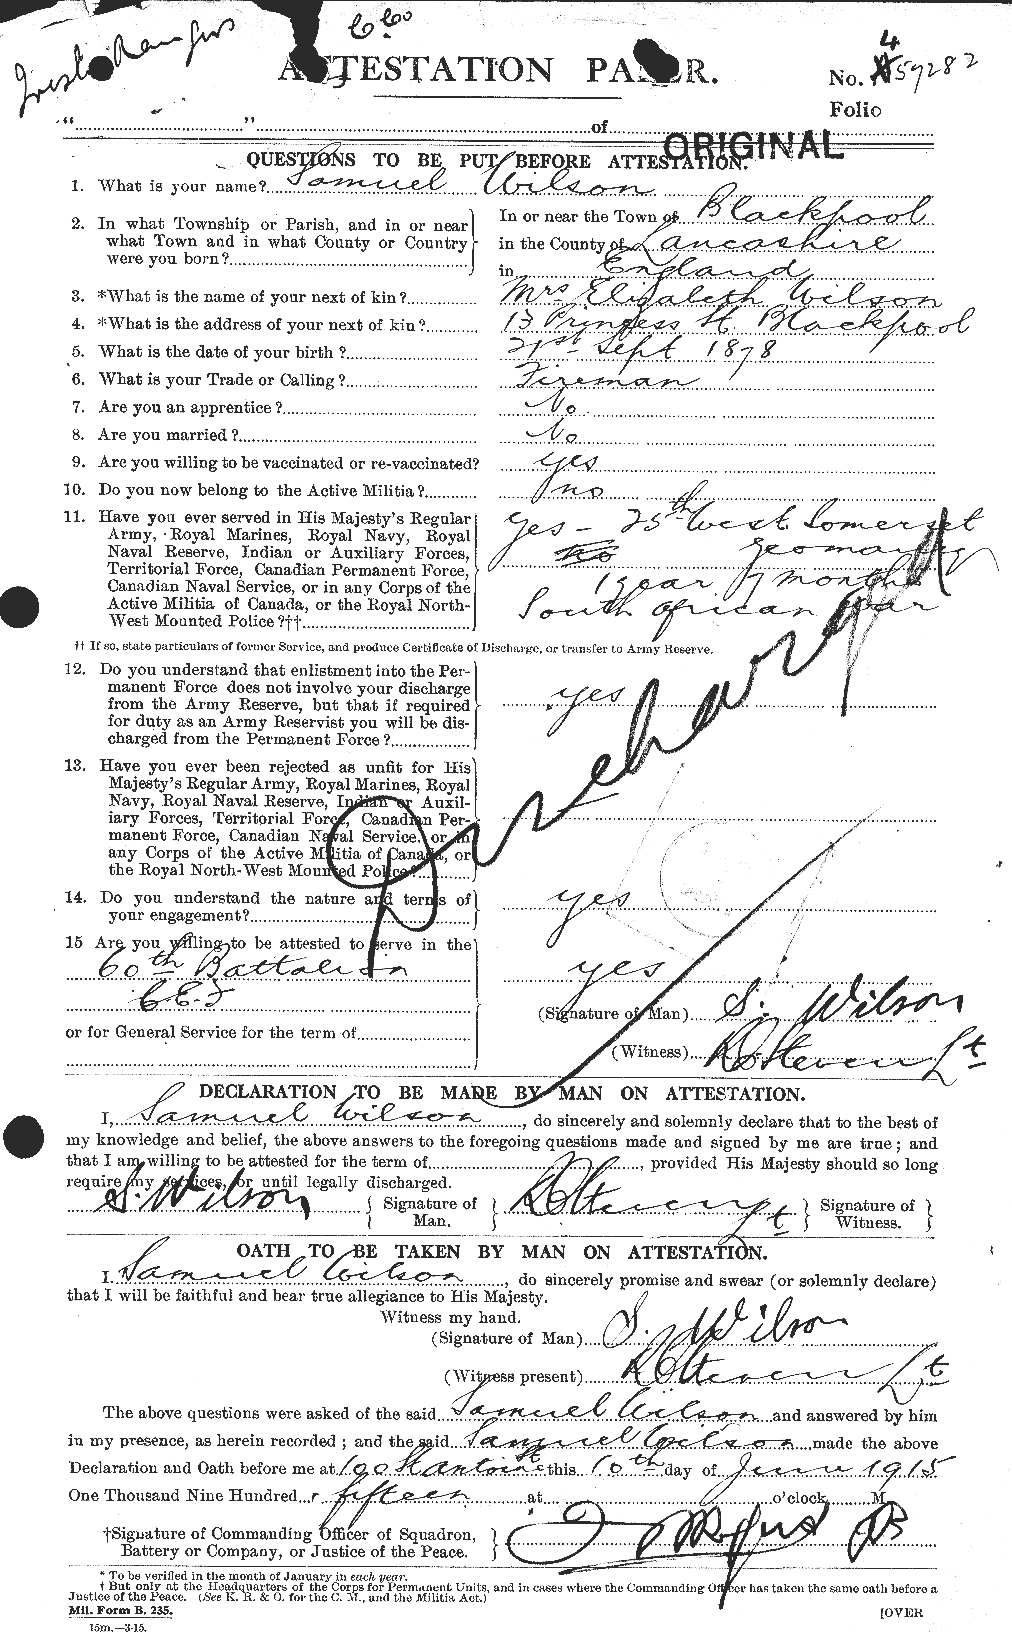 Personnel Records of the First World War - CEF 681093a